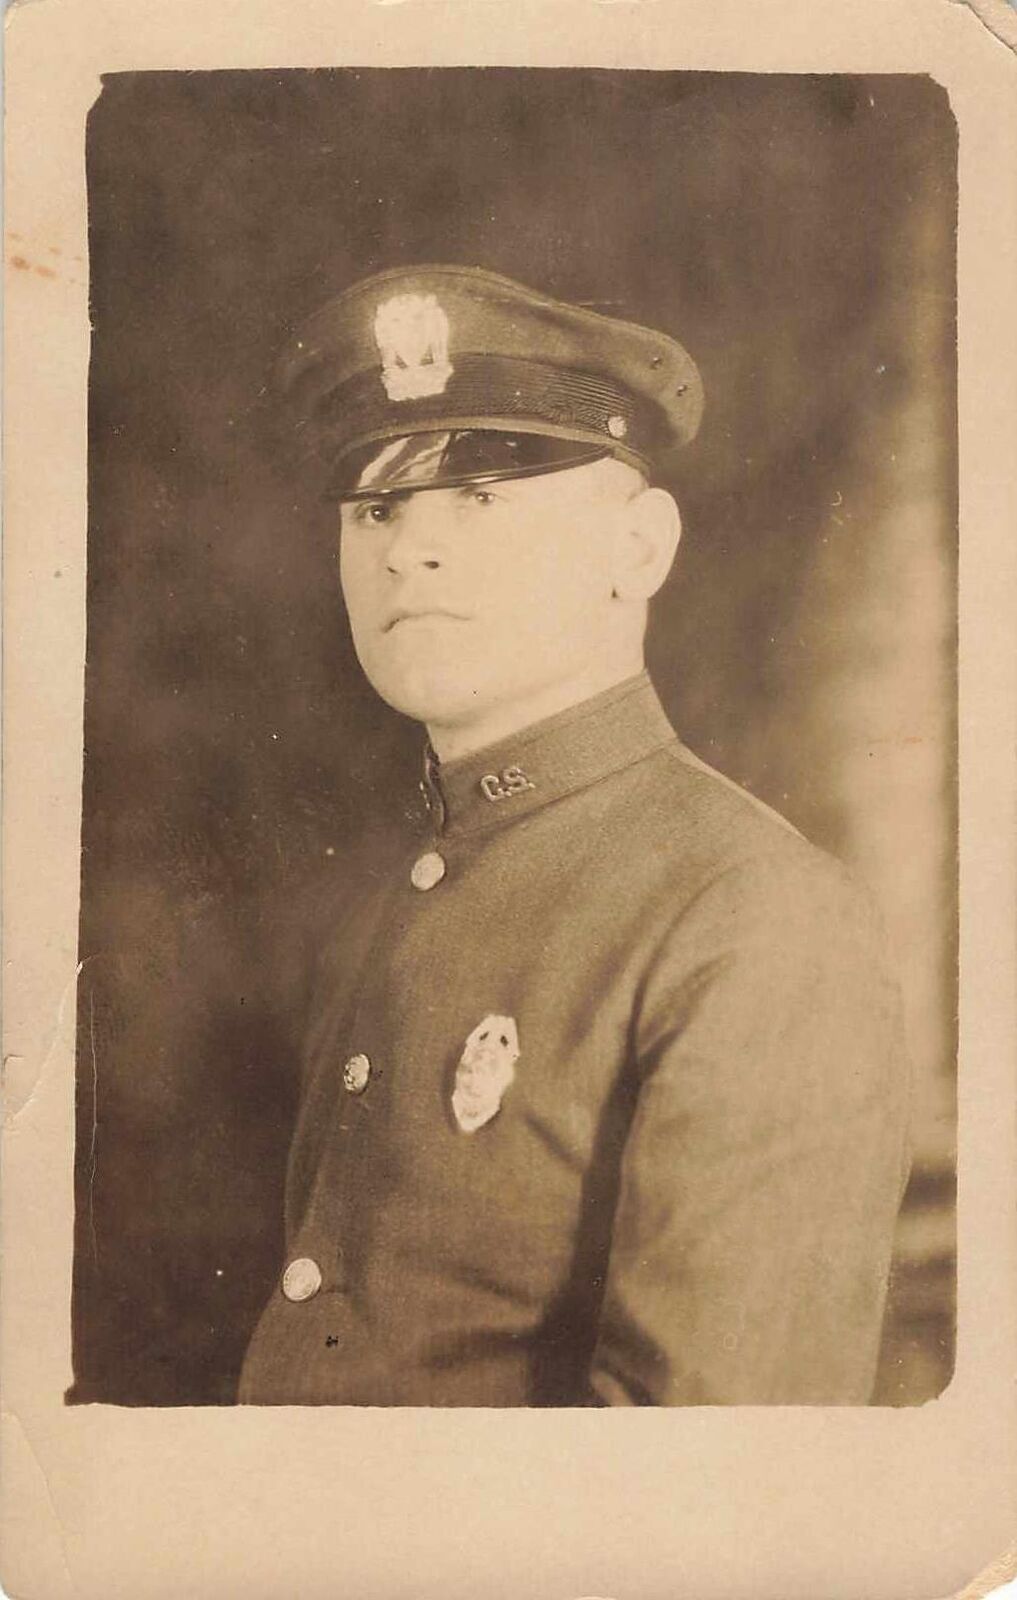 1910s RPPC Police Officer C.S. Colorado Springs? Real Photo Postcard Cop as-is